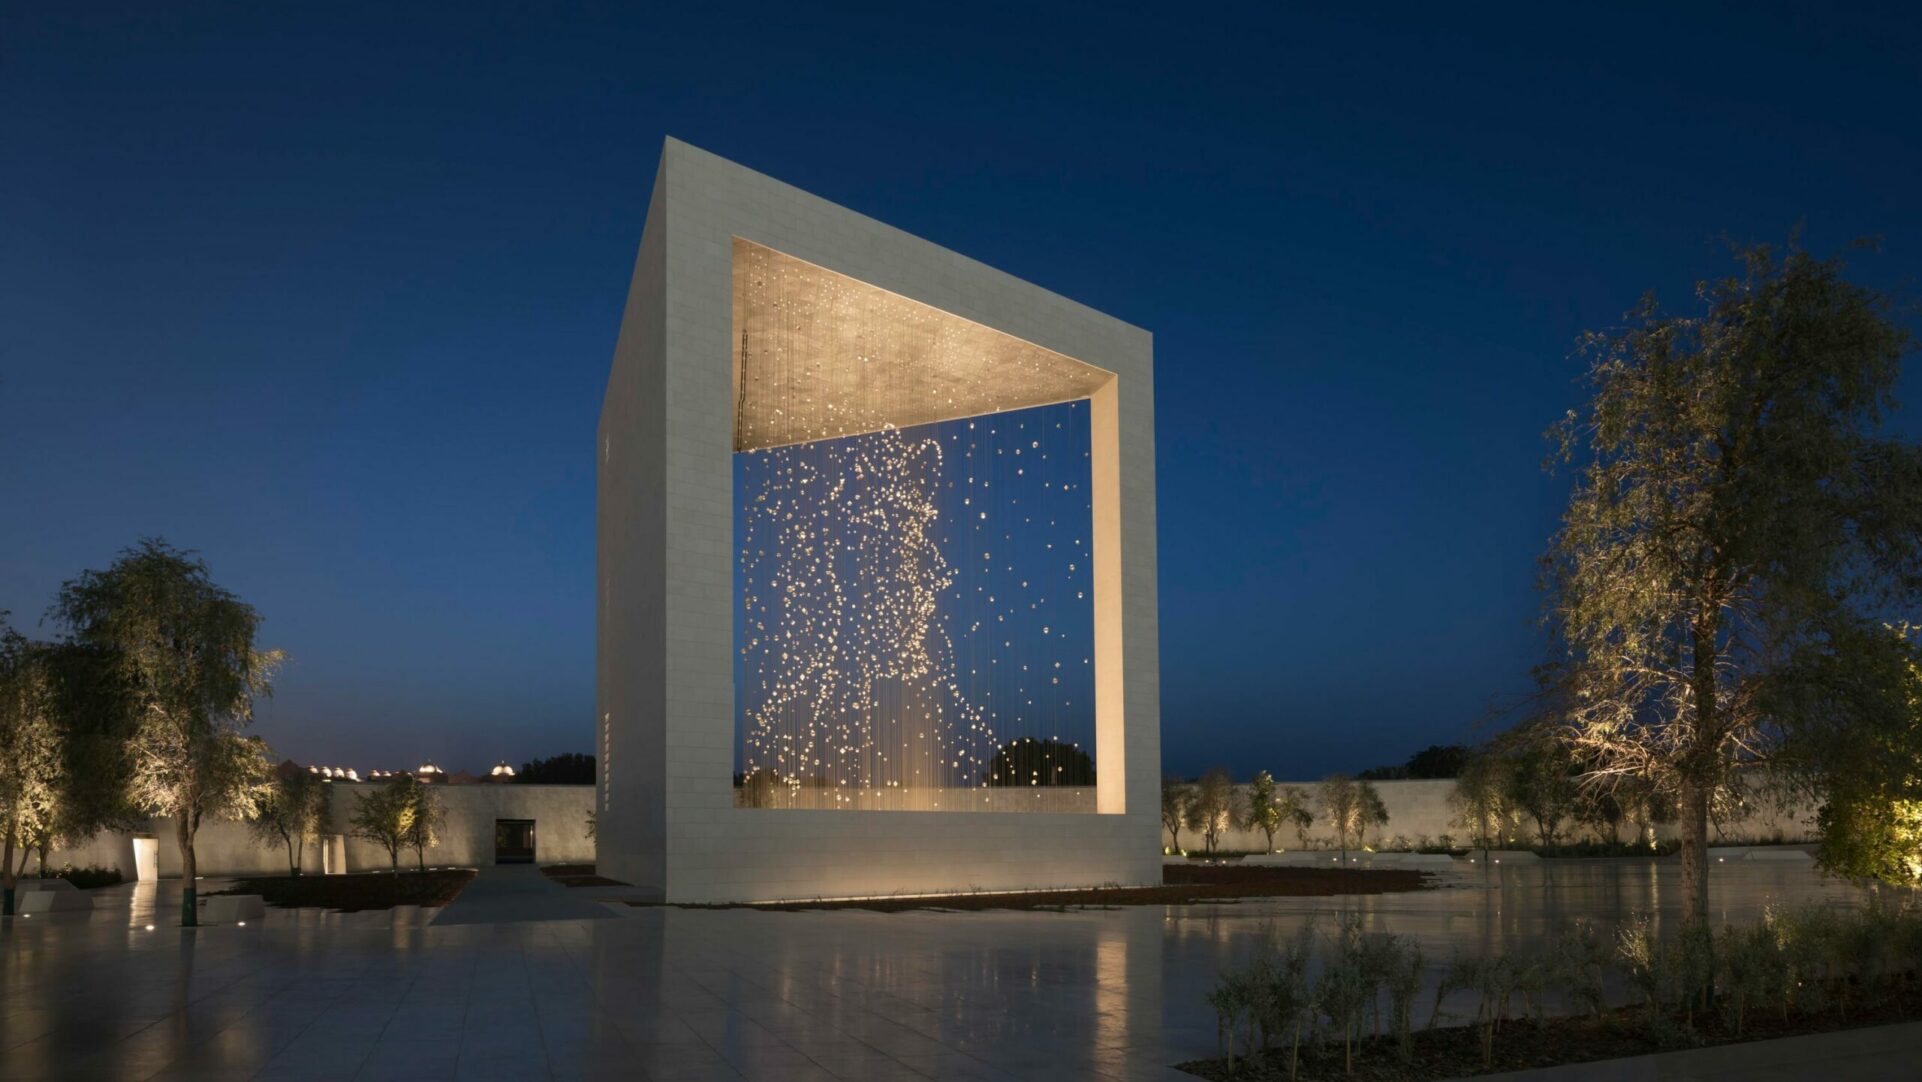 A night time shot of the constellation sculpture in the Founder's Memorial in Abu Dhabi, UAE.